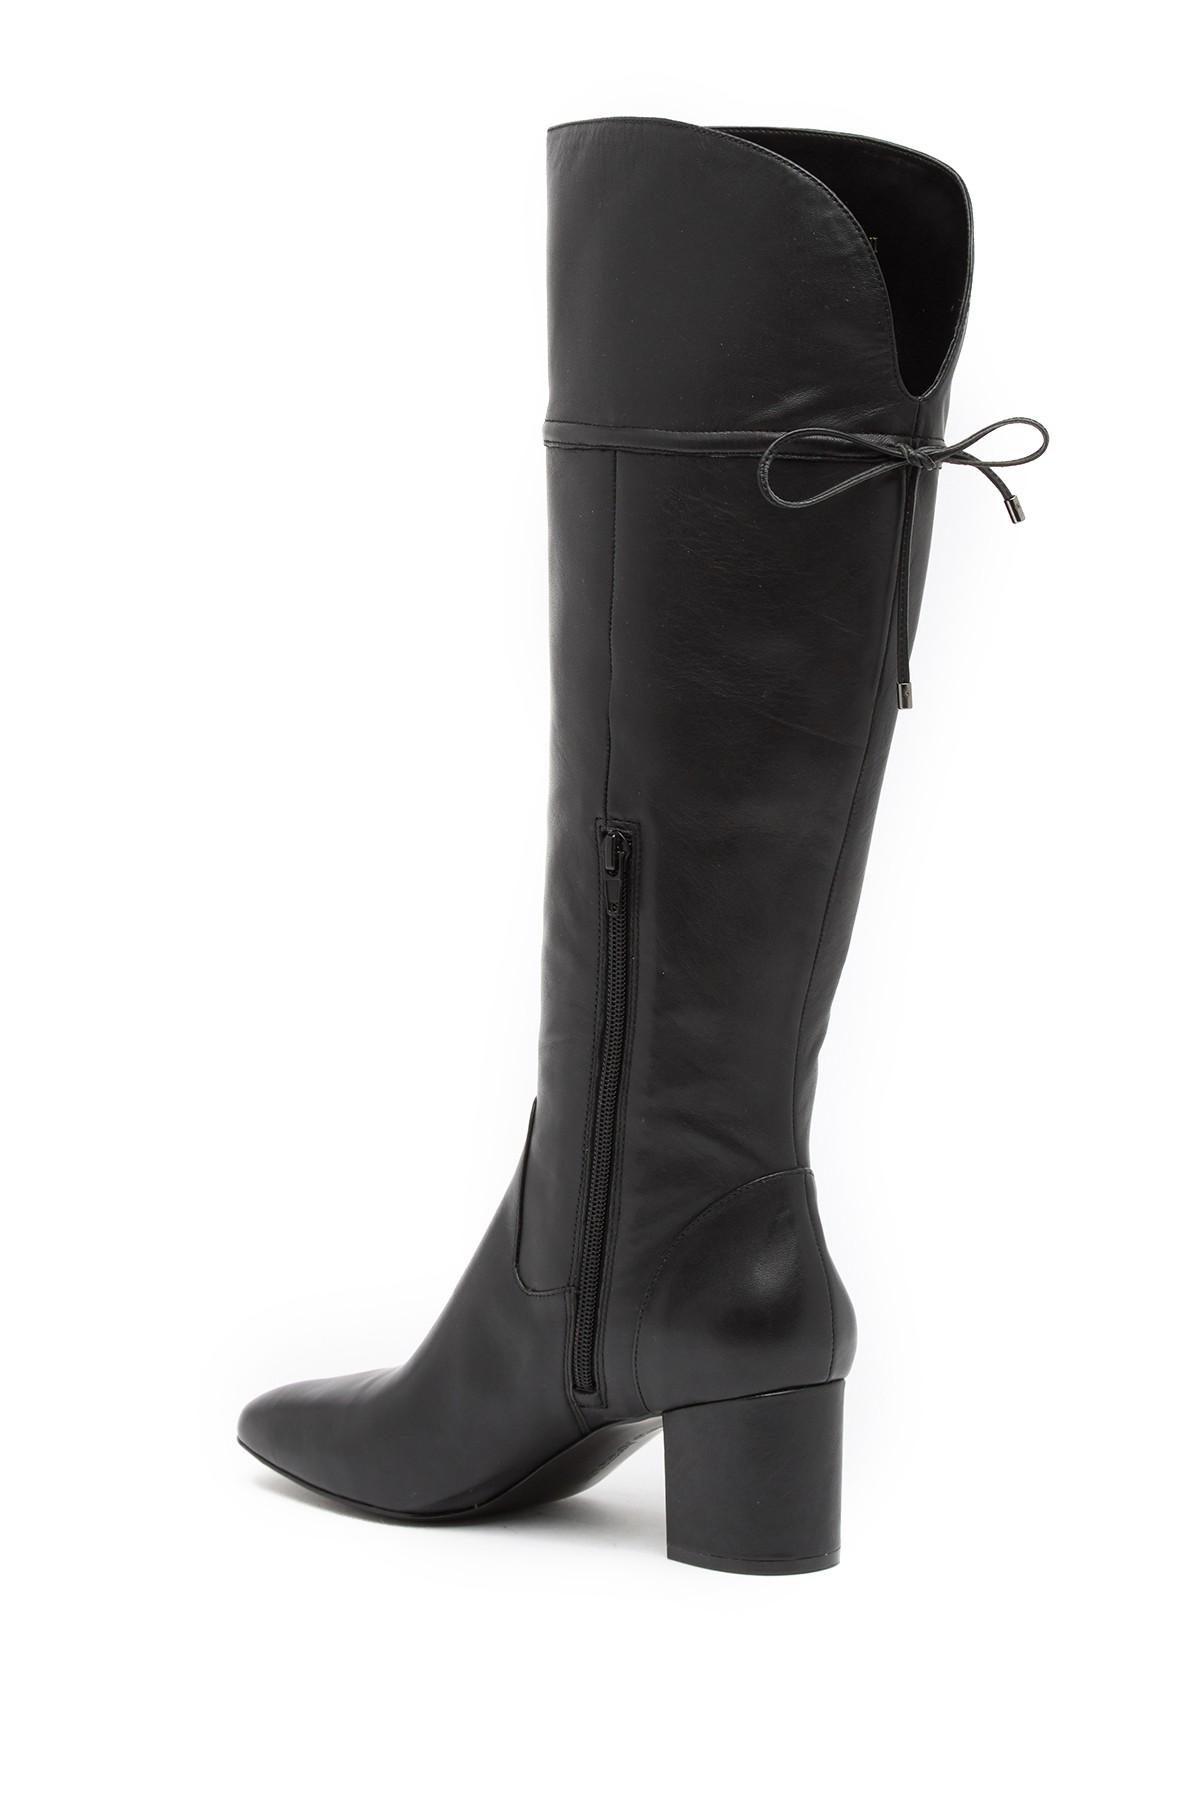 enzo angiolini paceton boots